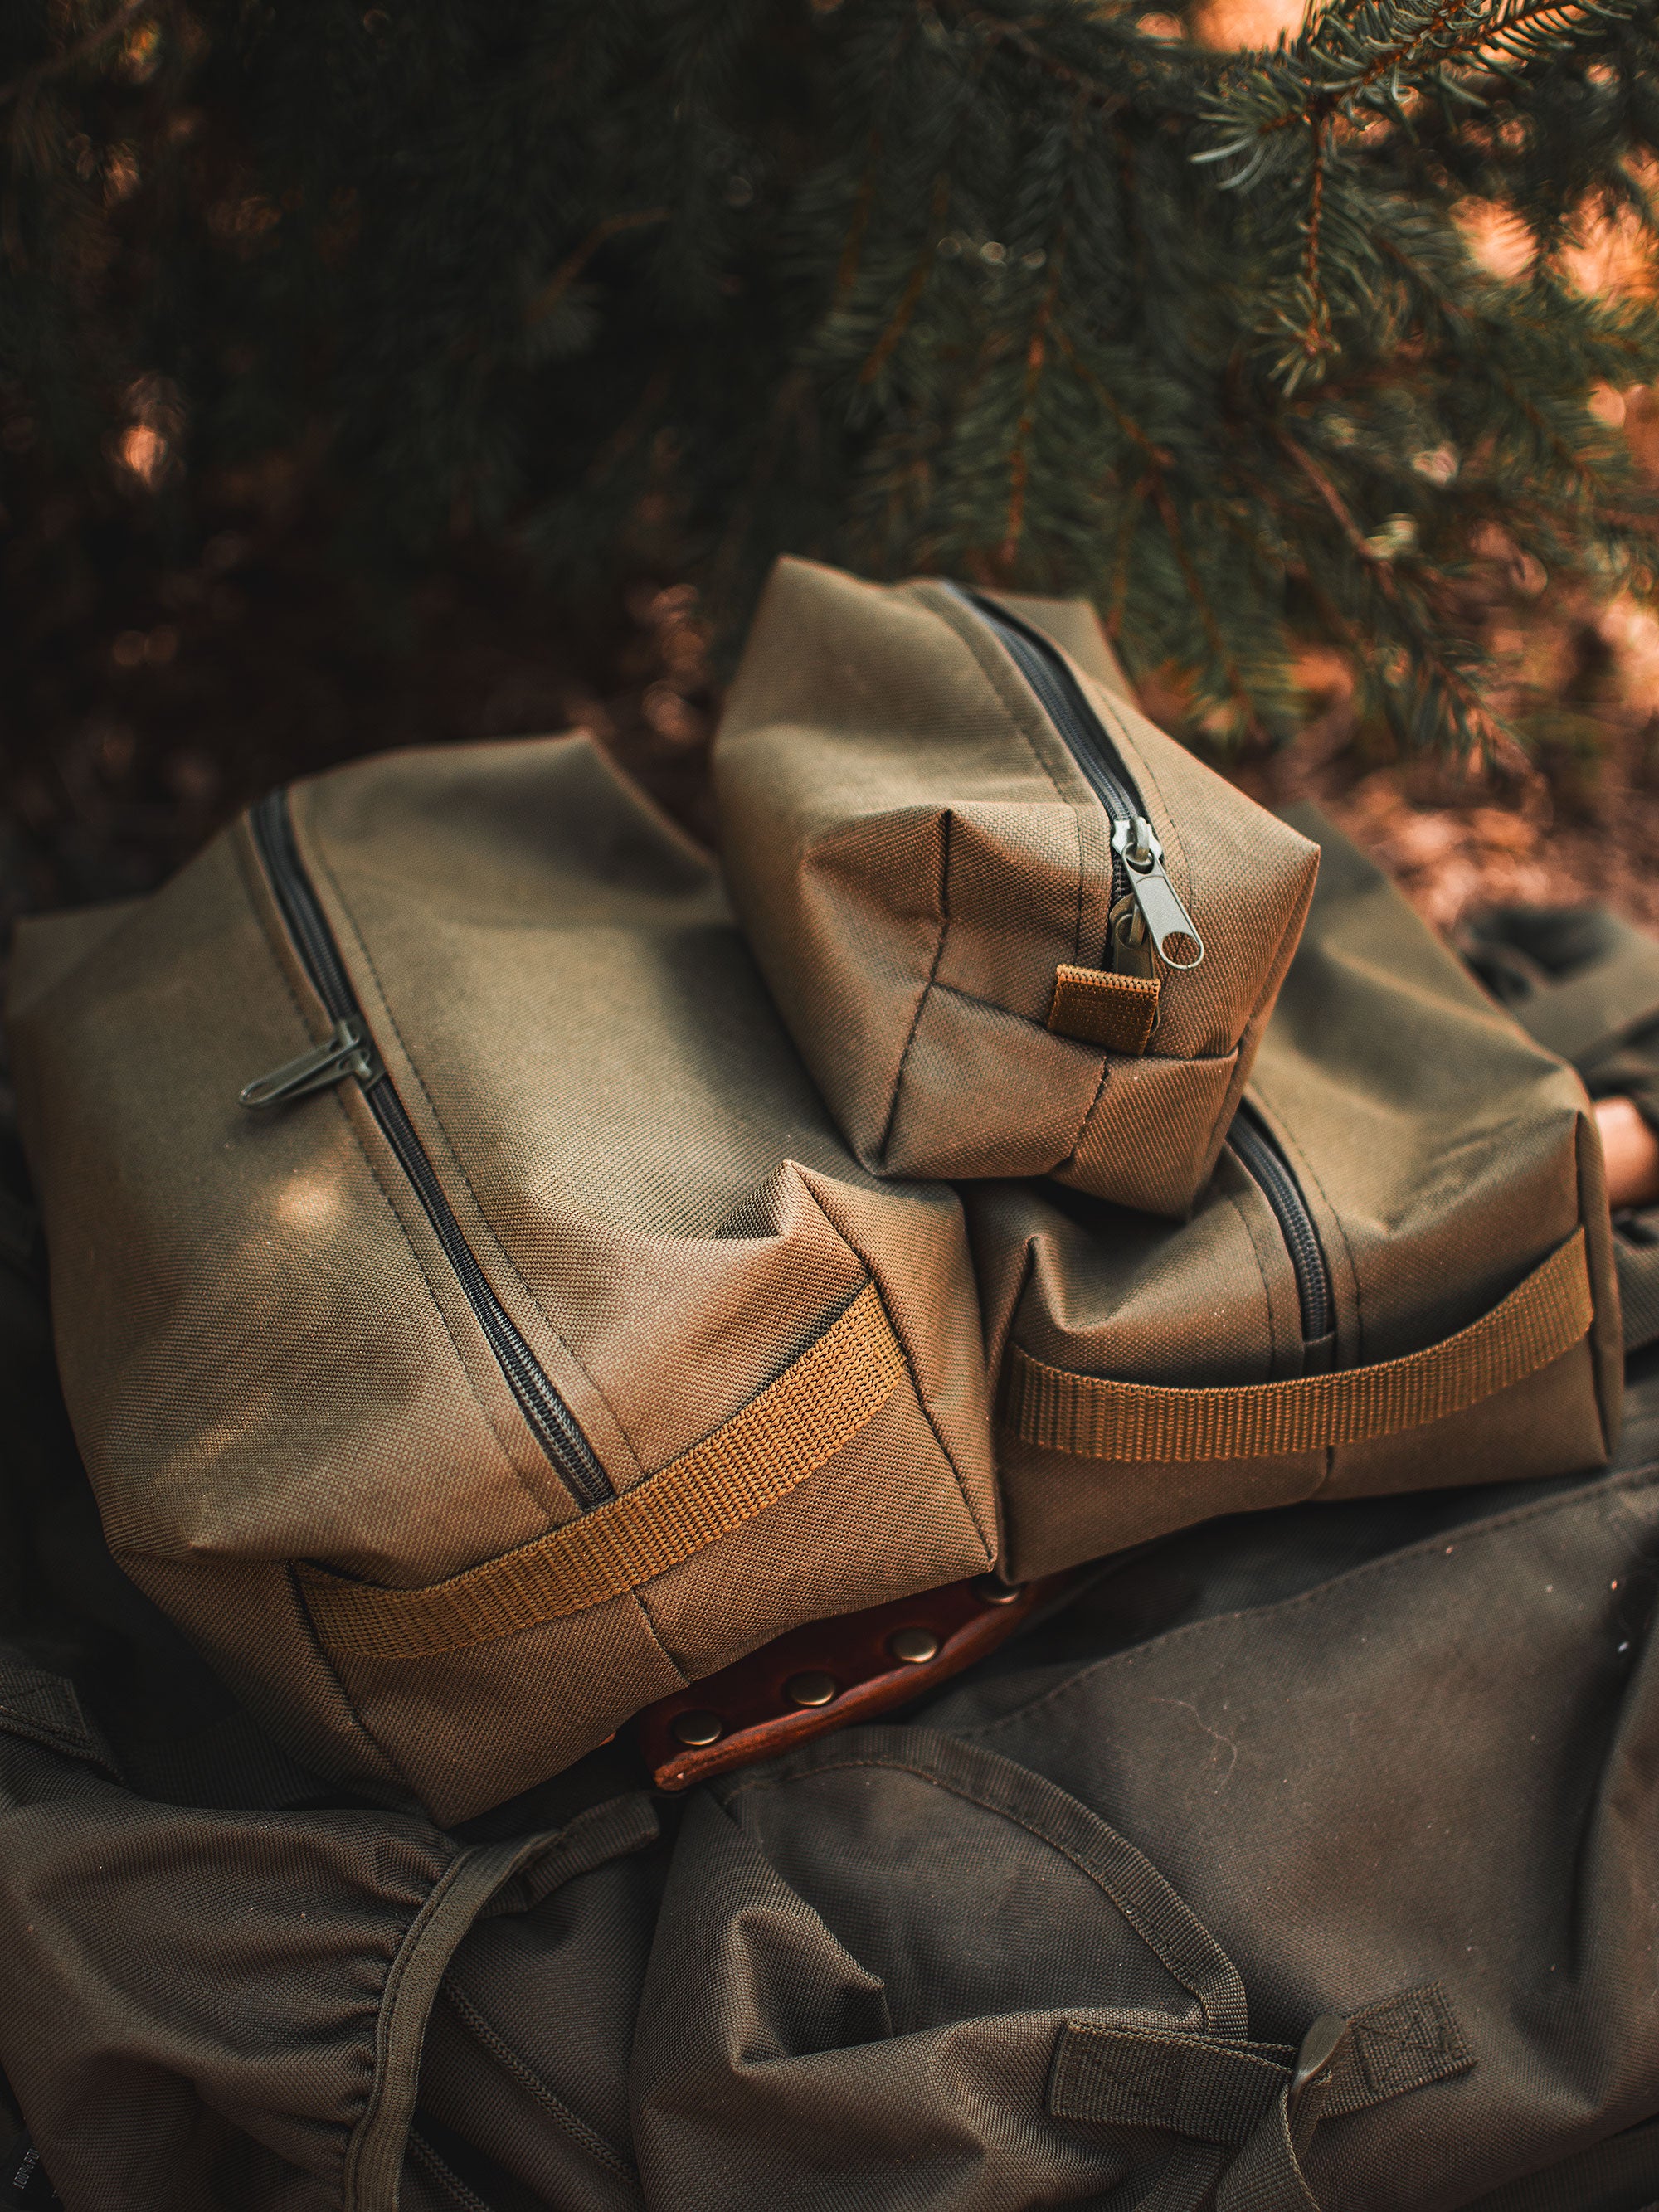 Leather Flat Belt Kit Bag by The Wild Buck Outdoors